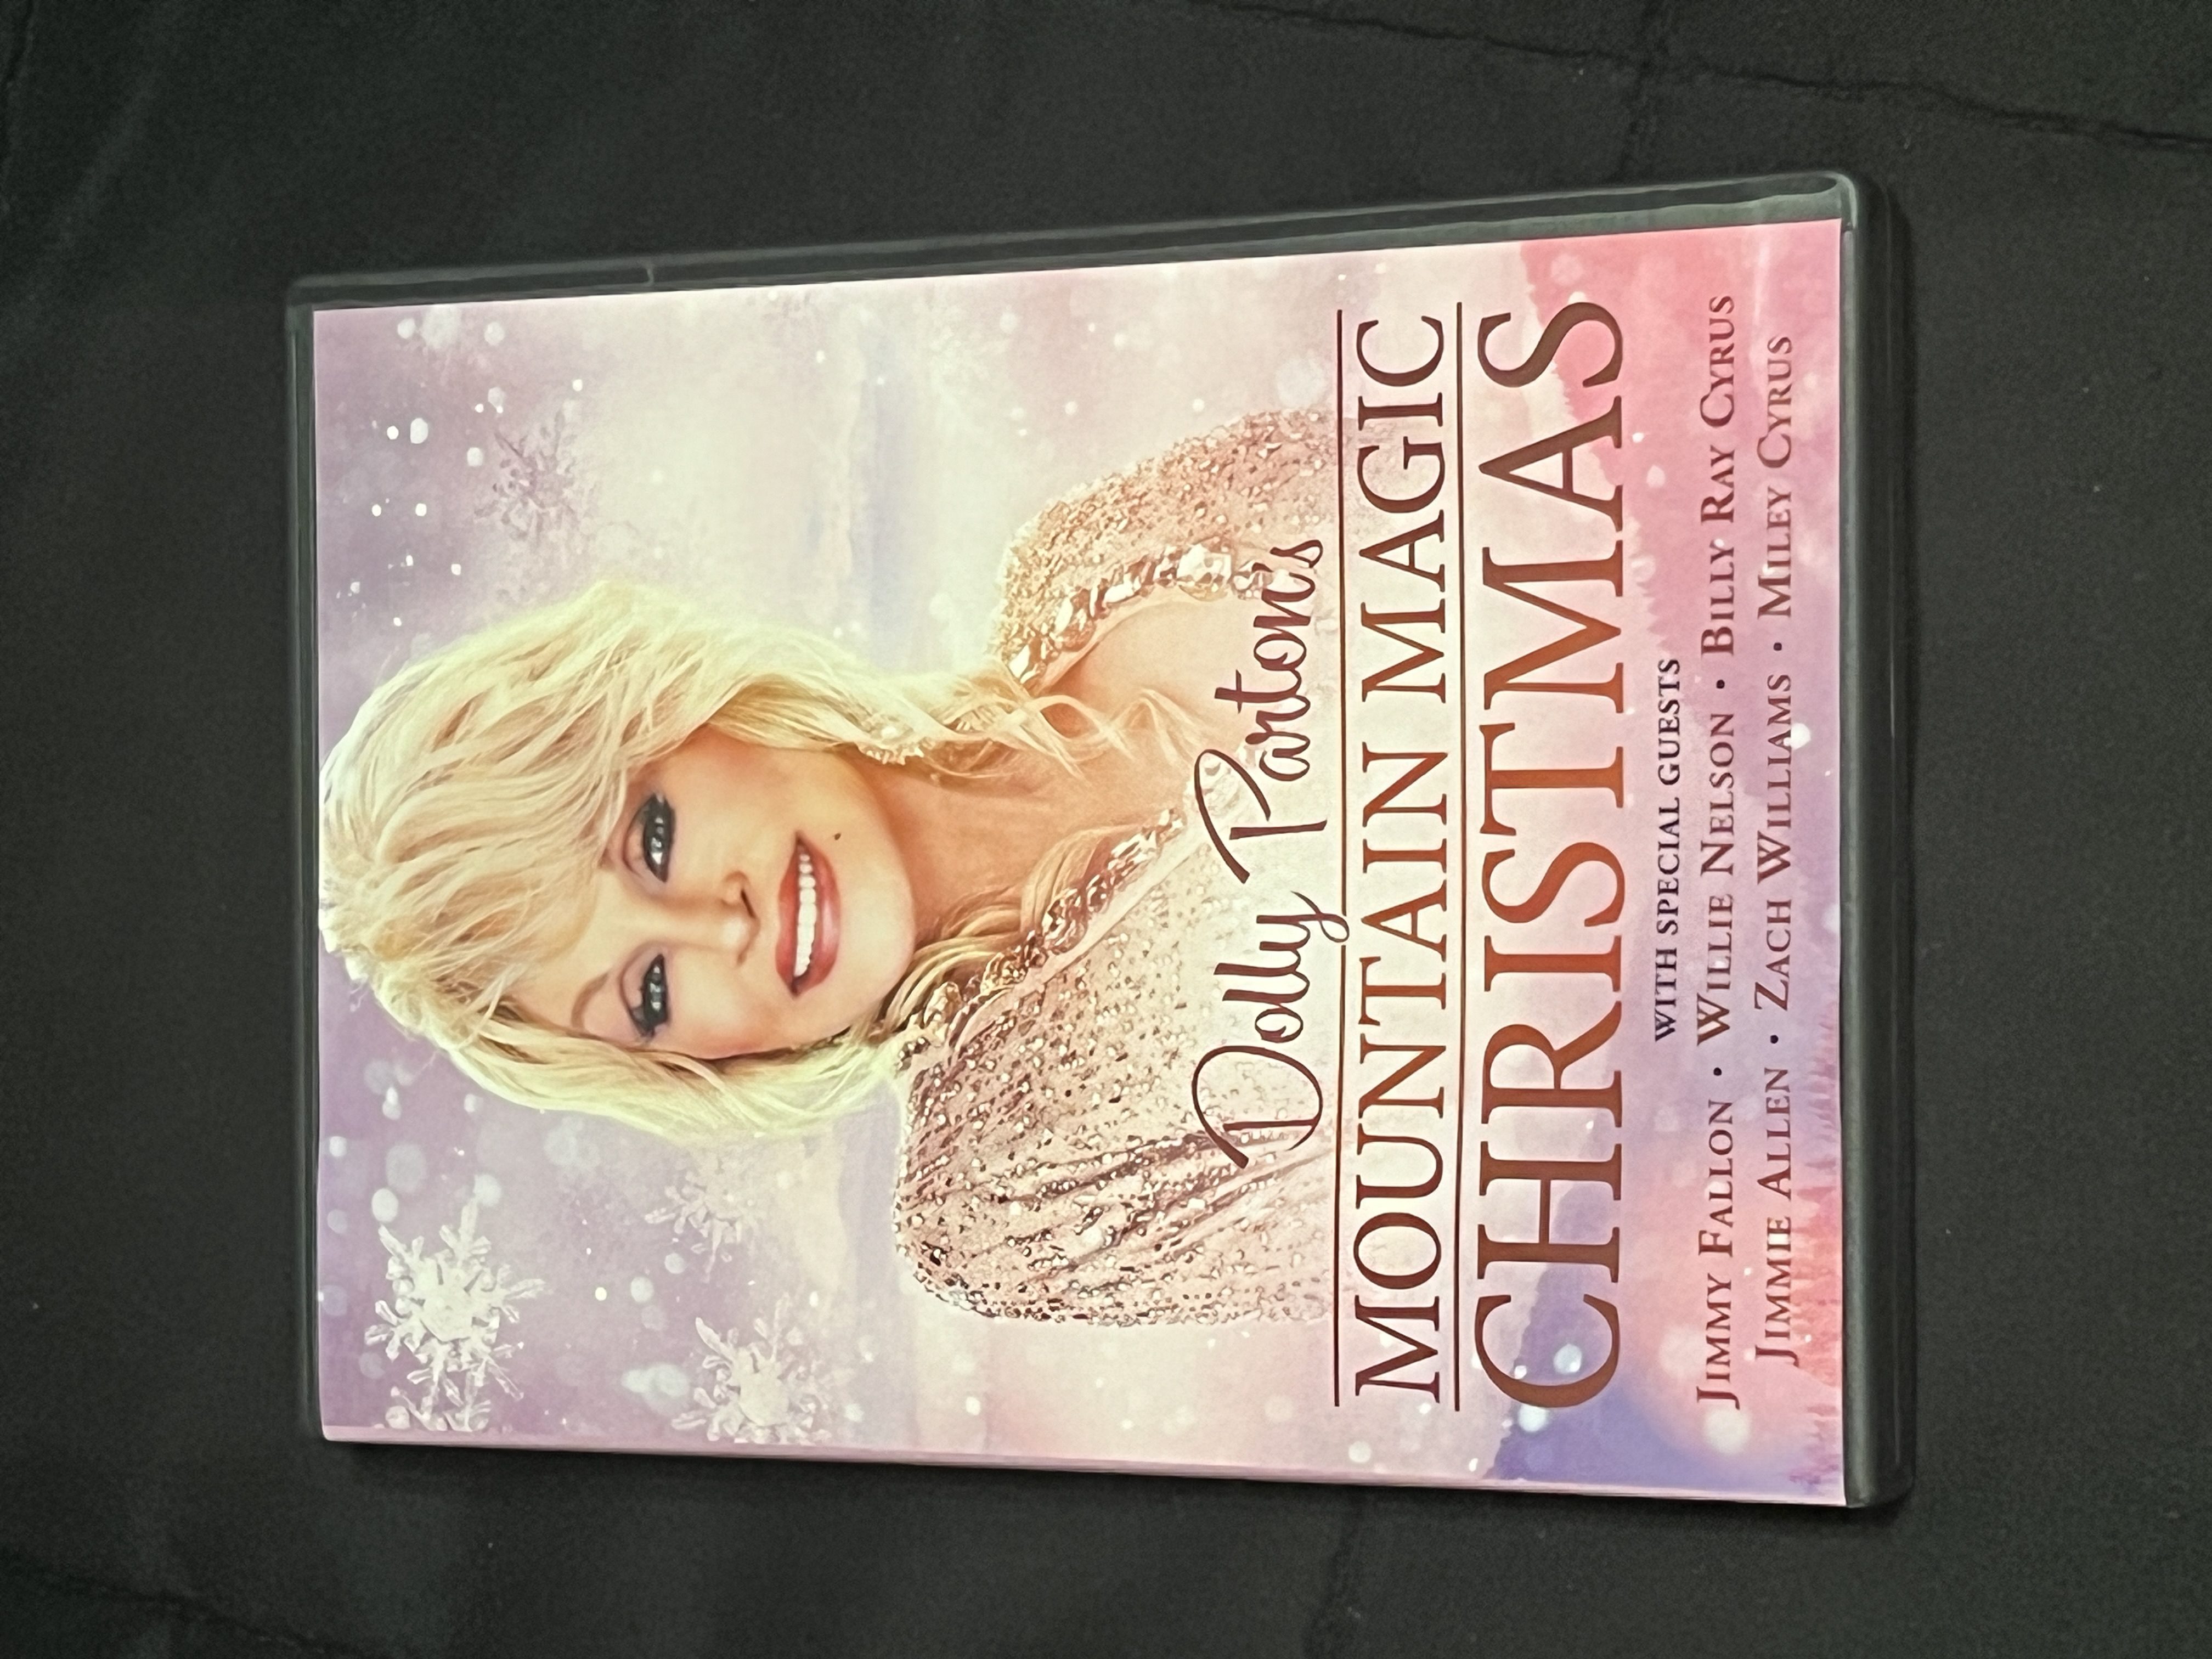 Read more about the article Dolly Parton’s Mountain Magic Christmas DVD Review